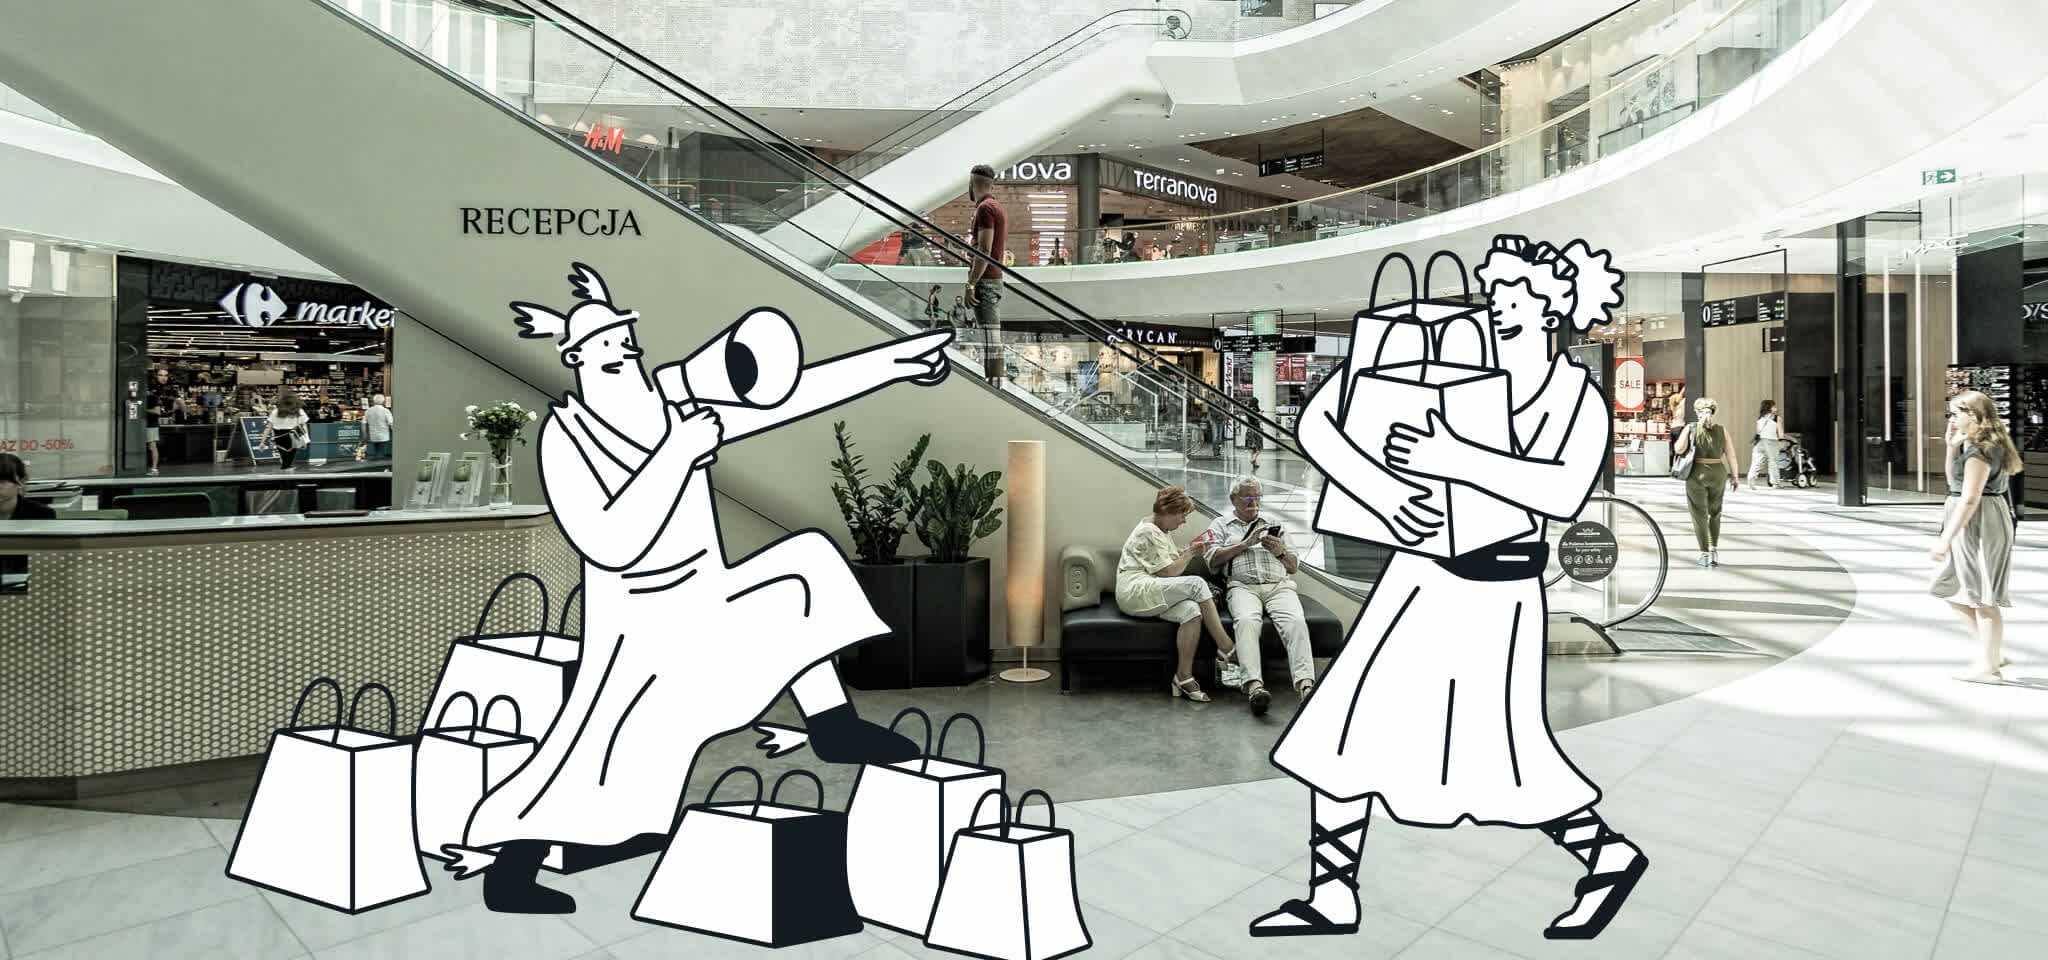 Hermes and a Goddess shopping in a mall